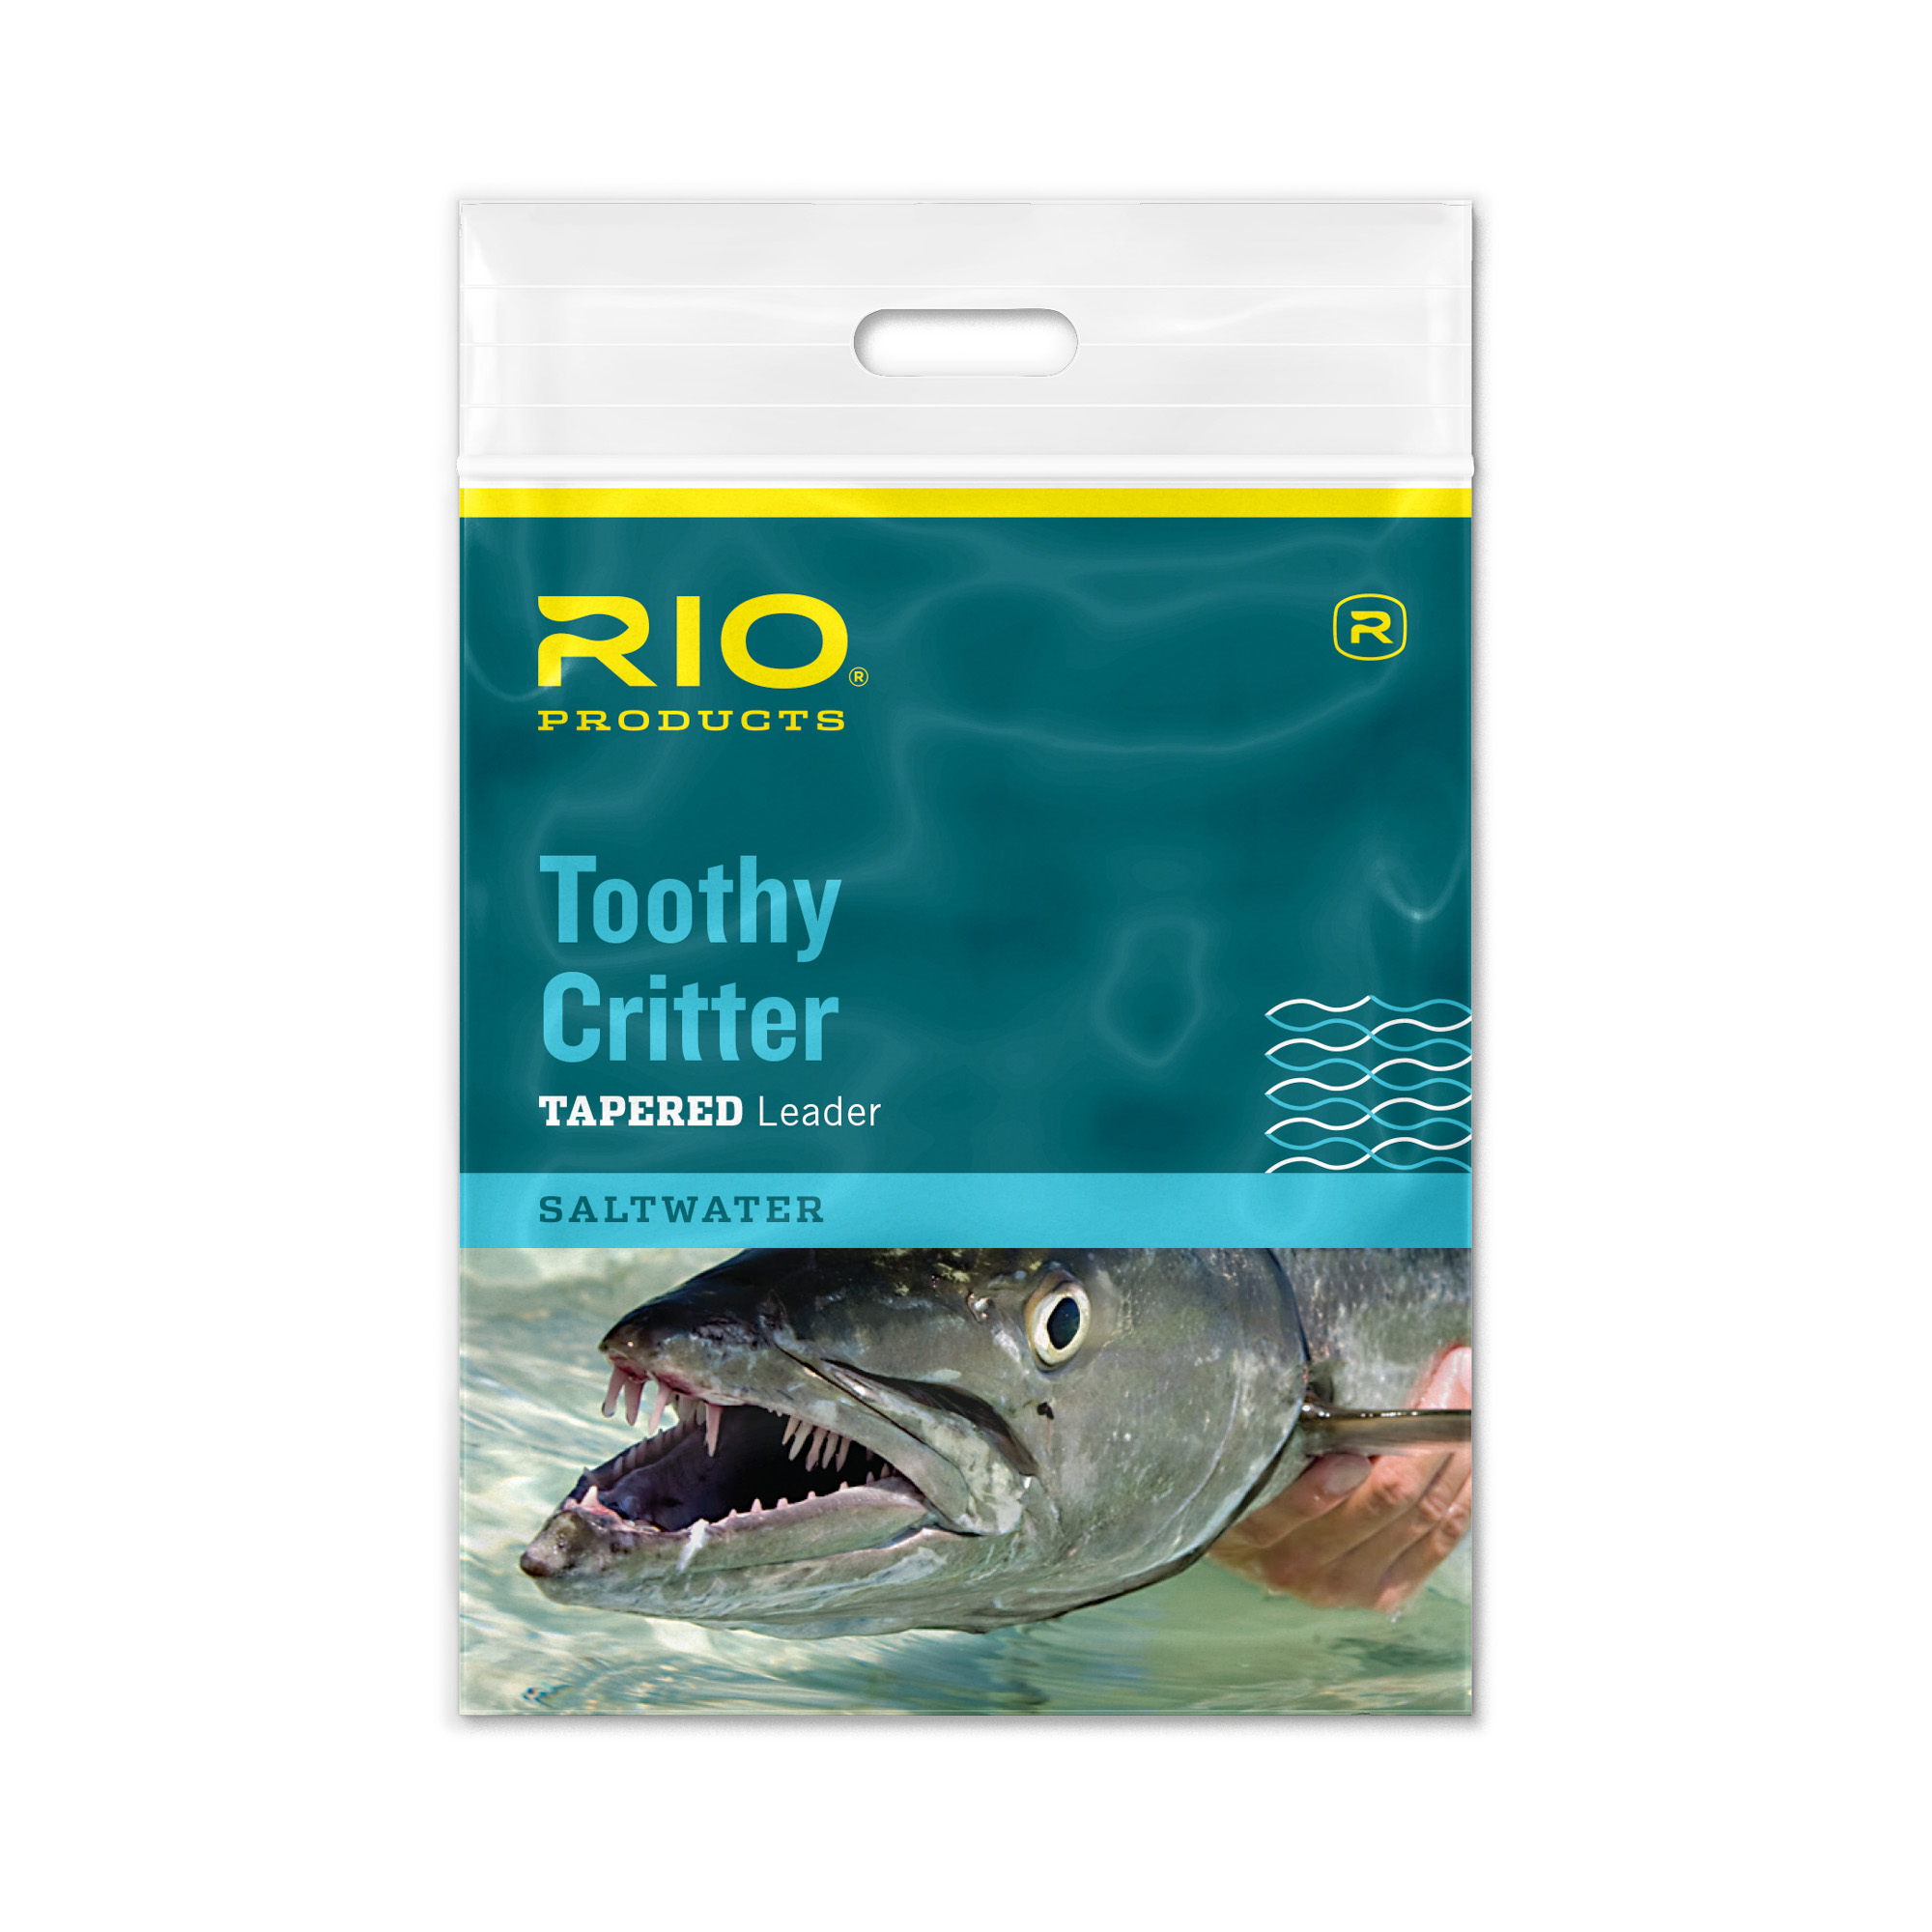 RIO Toothy Critter (7.5′) Leader – Guide Flyfishing, Fly Fishing Rods,  Reels, Sage, Redington, RIO